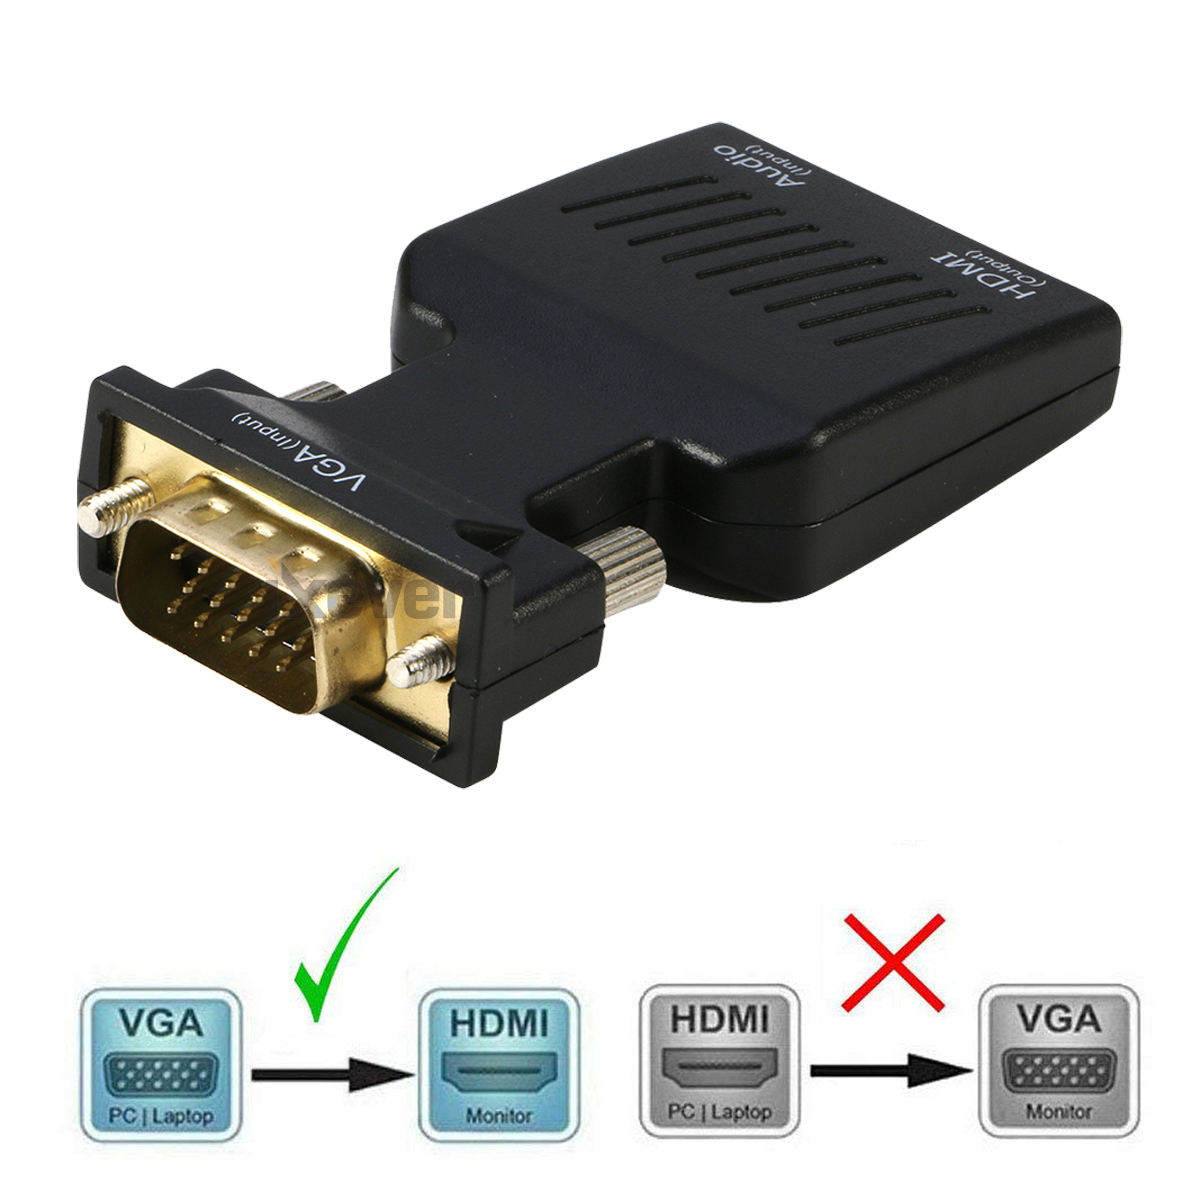  VGA to HDMI Cable, VGA to HDMI Adapter Cable with Audio for  Connecting Old PC, Laptop with a VGA Output to New Monitor, Display, HDTV  with HDMI Input (Male to Male) 